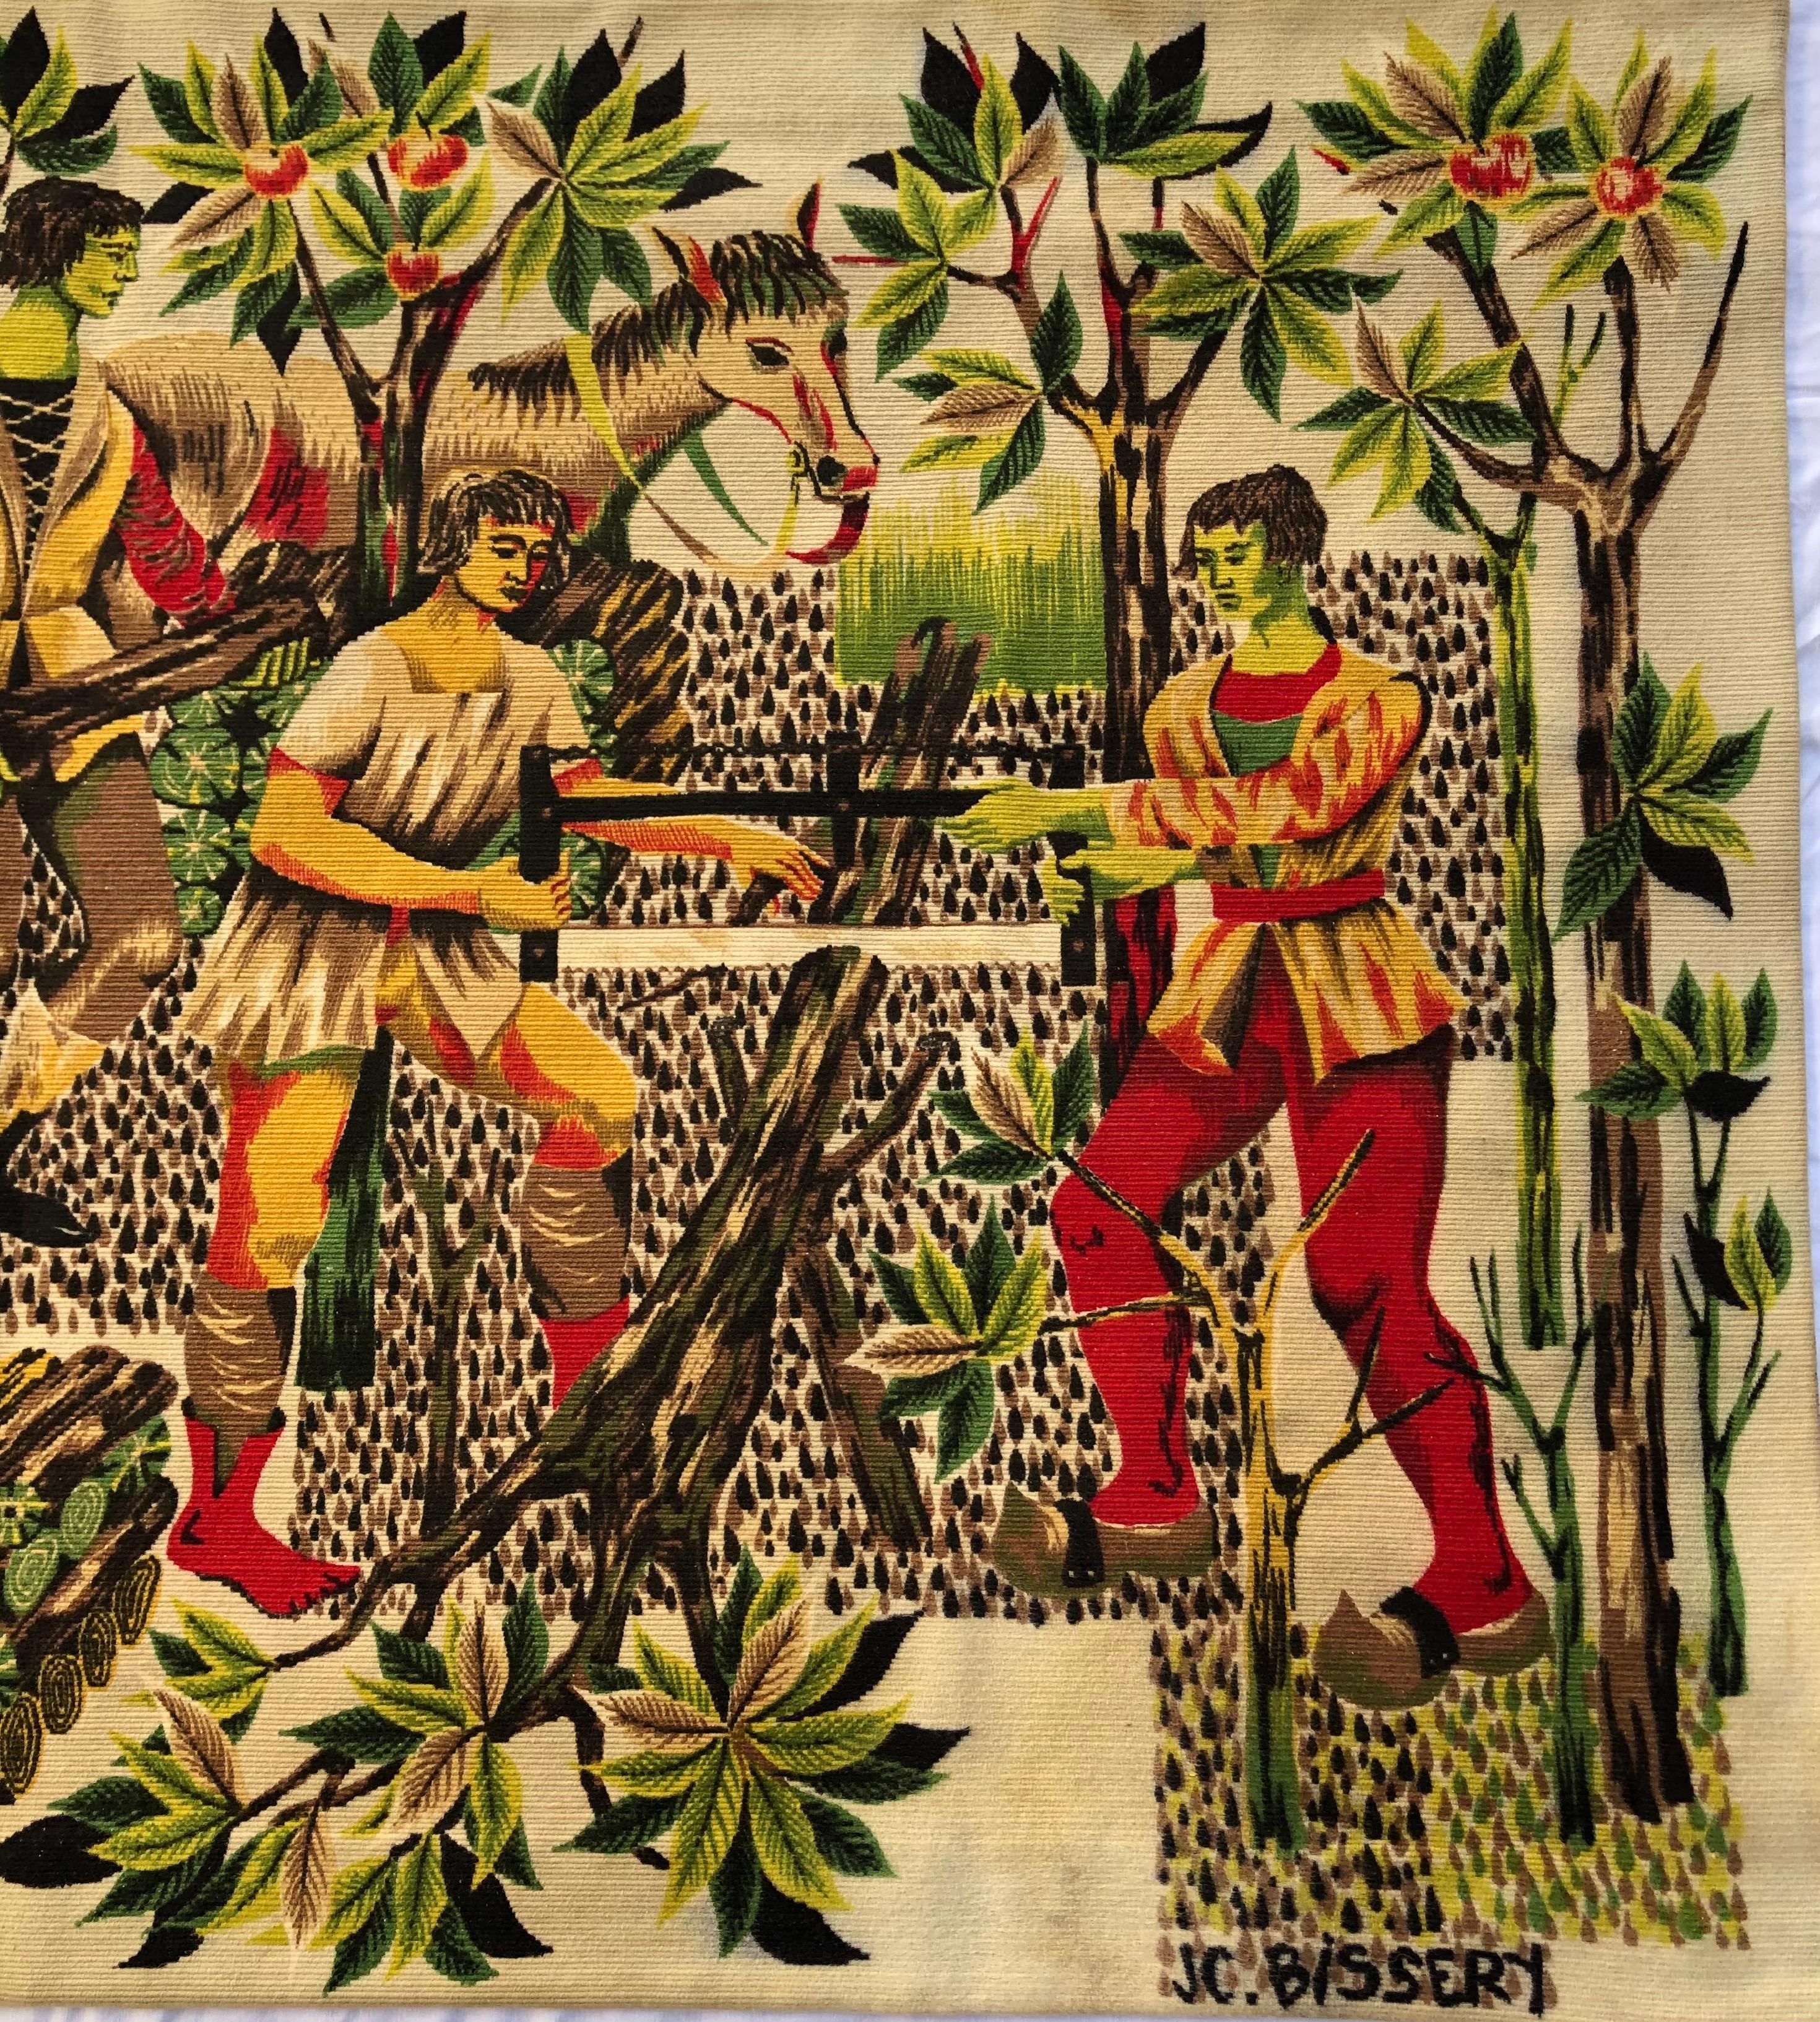 Rare vintage French tapestry or wall hanging by Jean-Claude Bissery, circa 1960. Rare! Gorgeous Signed JC Bissery French Tapestry LARGE Limited Edition, 3/100

This tapestry is a wonderful statement piece for any modern, contemporary or midcentury